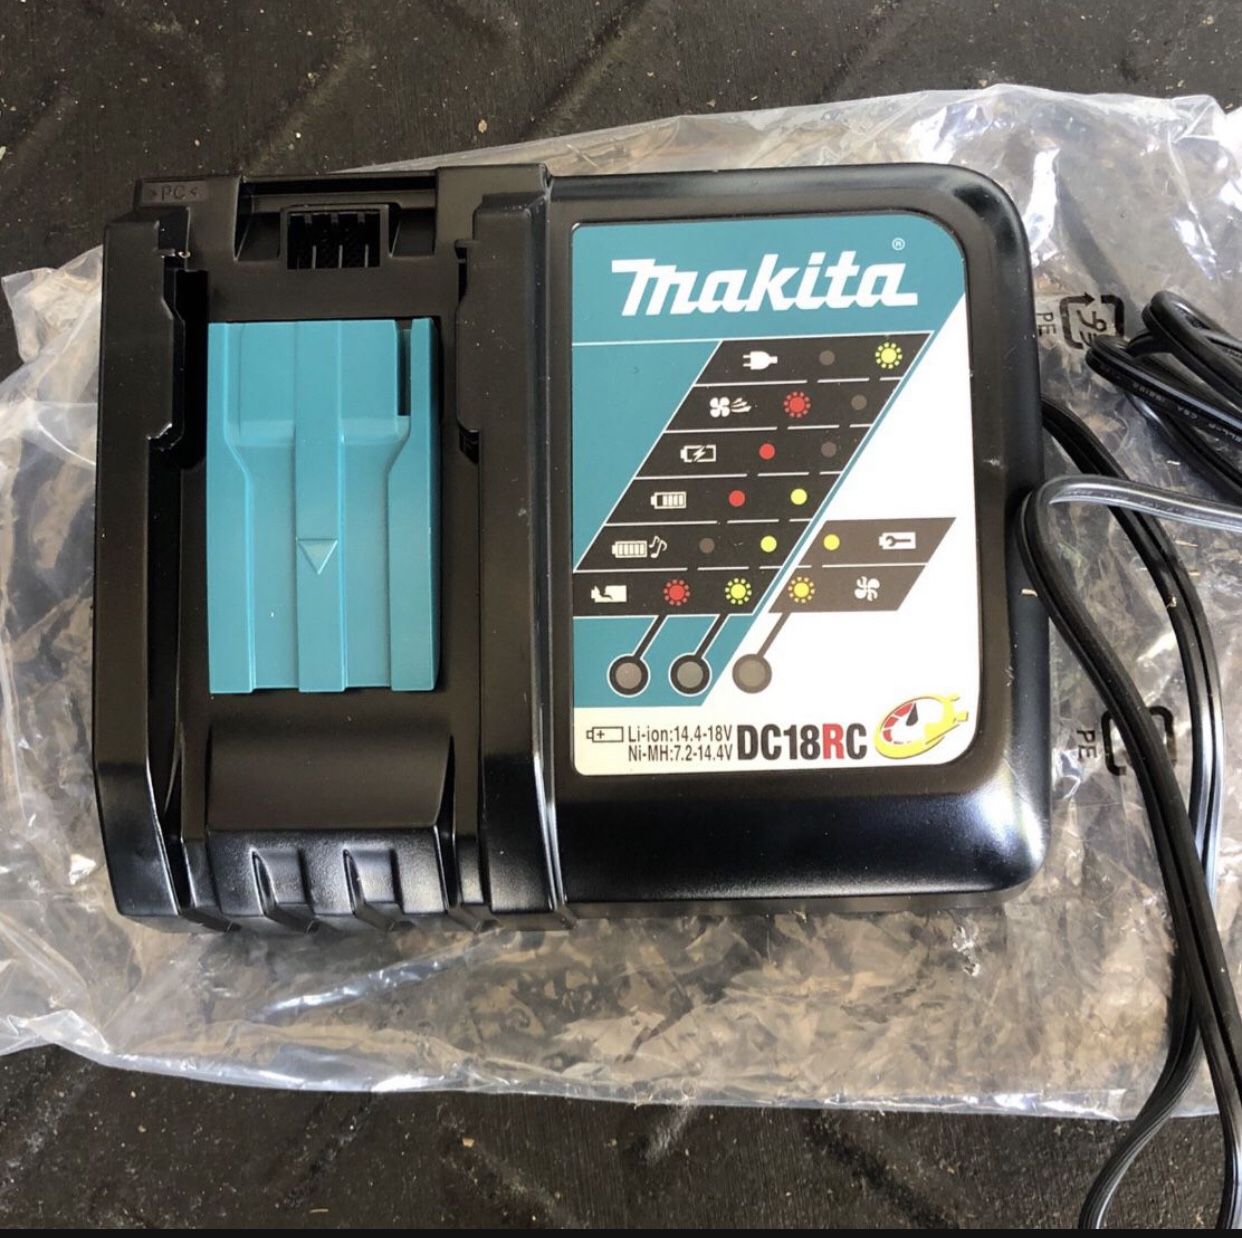 Makita 18v Battery Charger Unused Brand New Makita Battery Charger Dc18rc